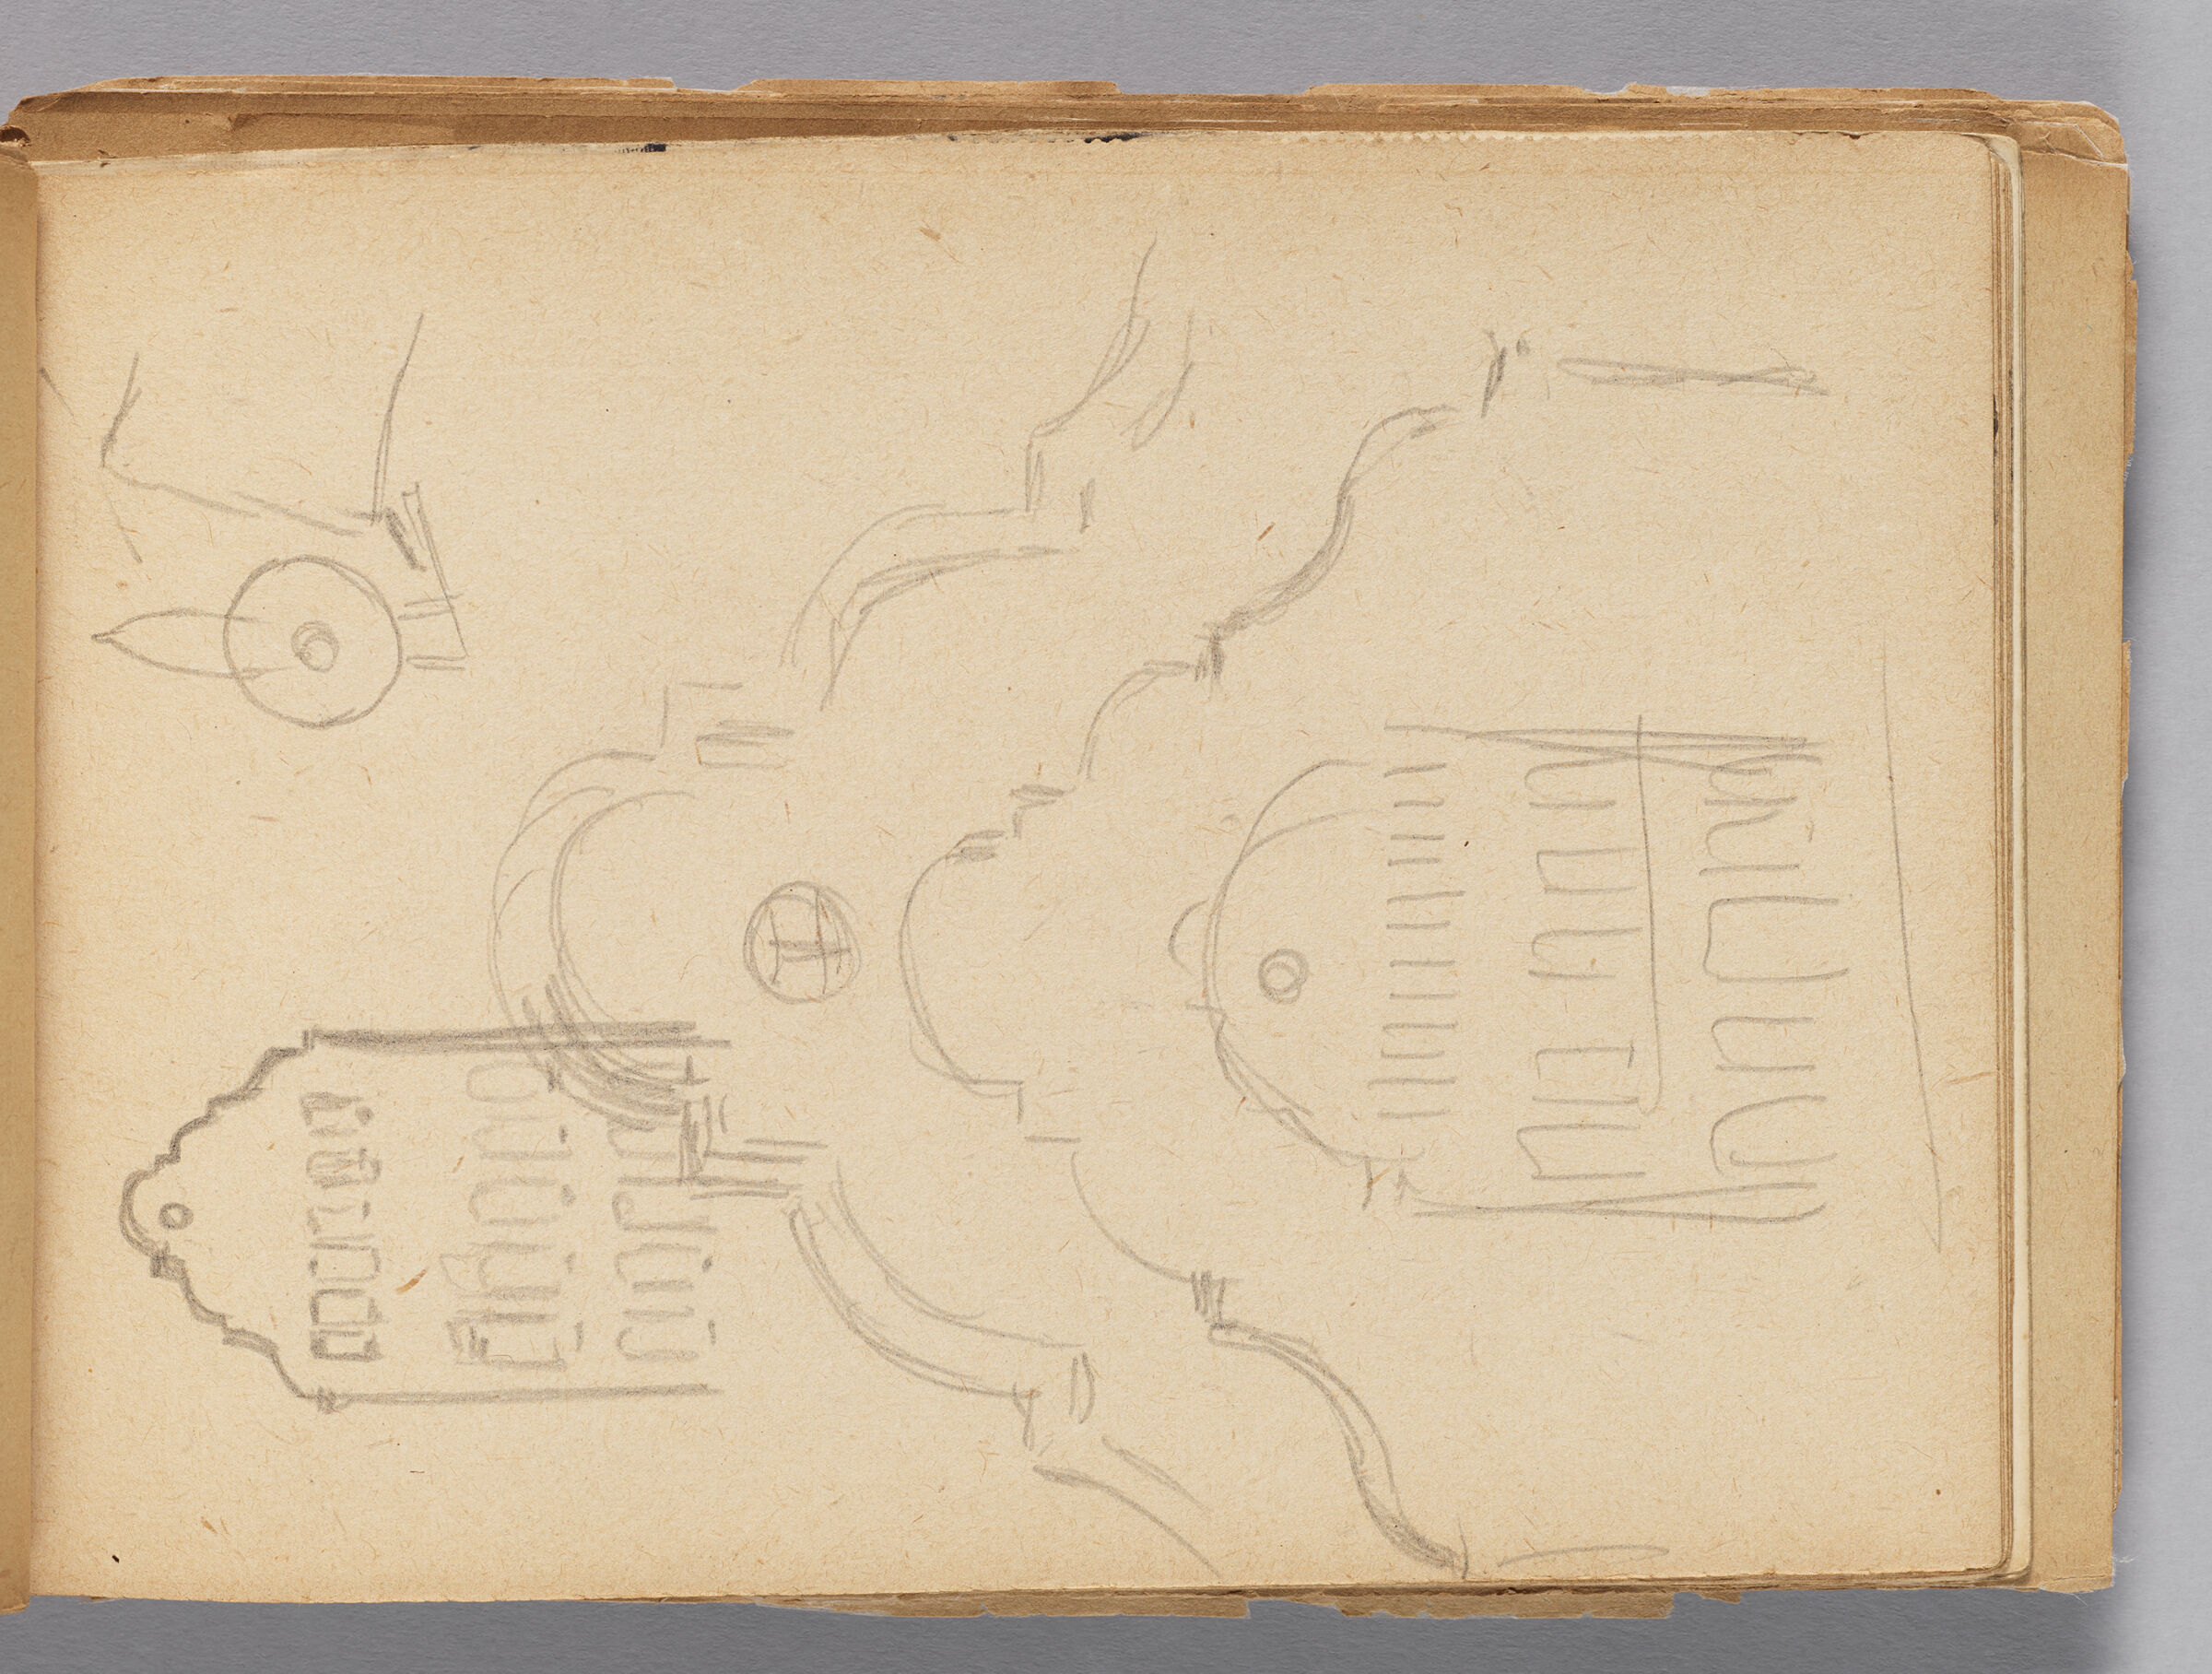 Untitled (Female Figure At Spinning Wheel, Left Page); Untitled (Architectural Sketches, Right Page)